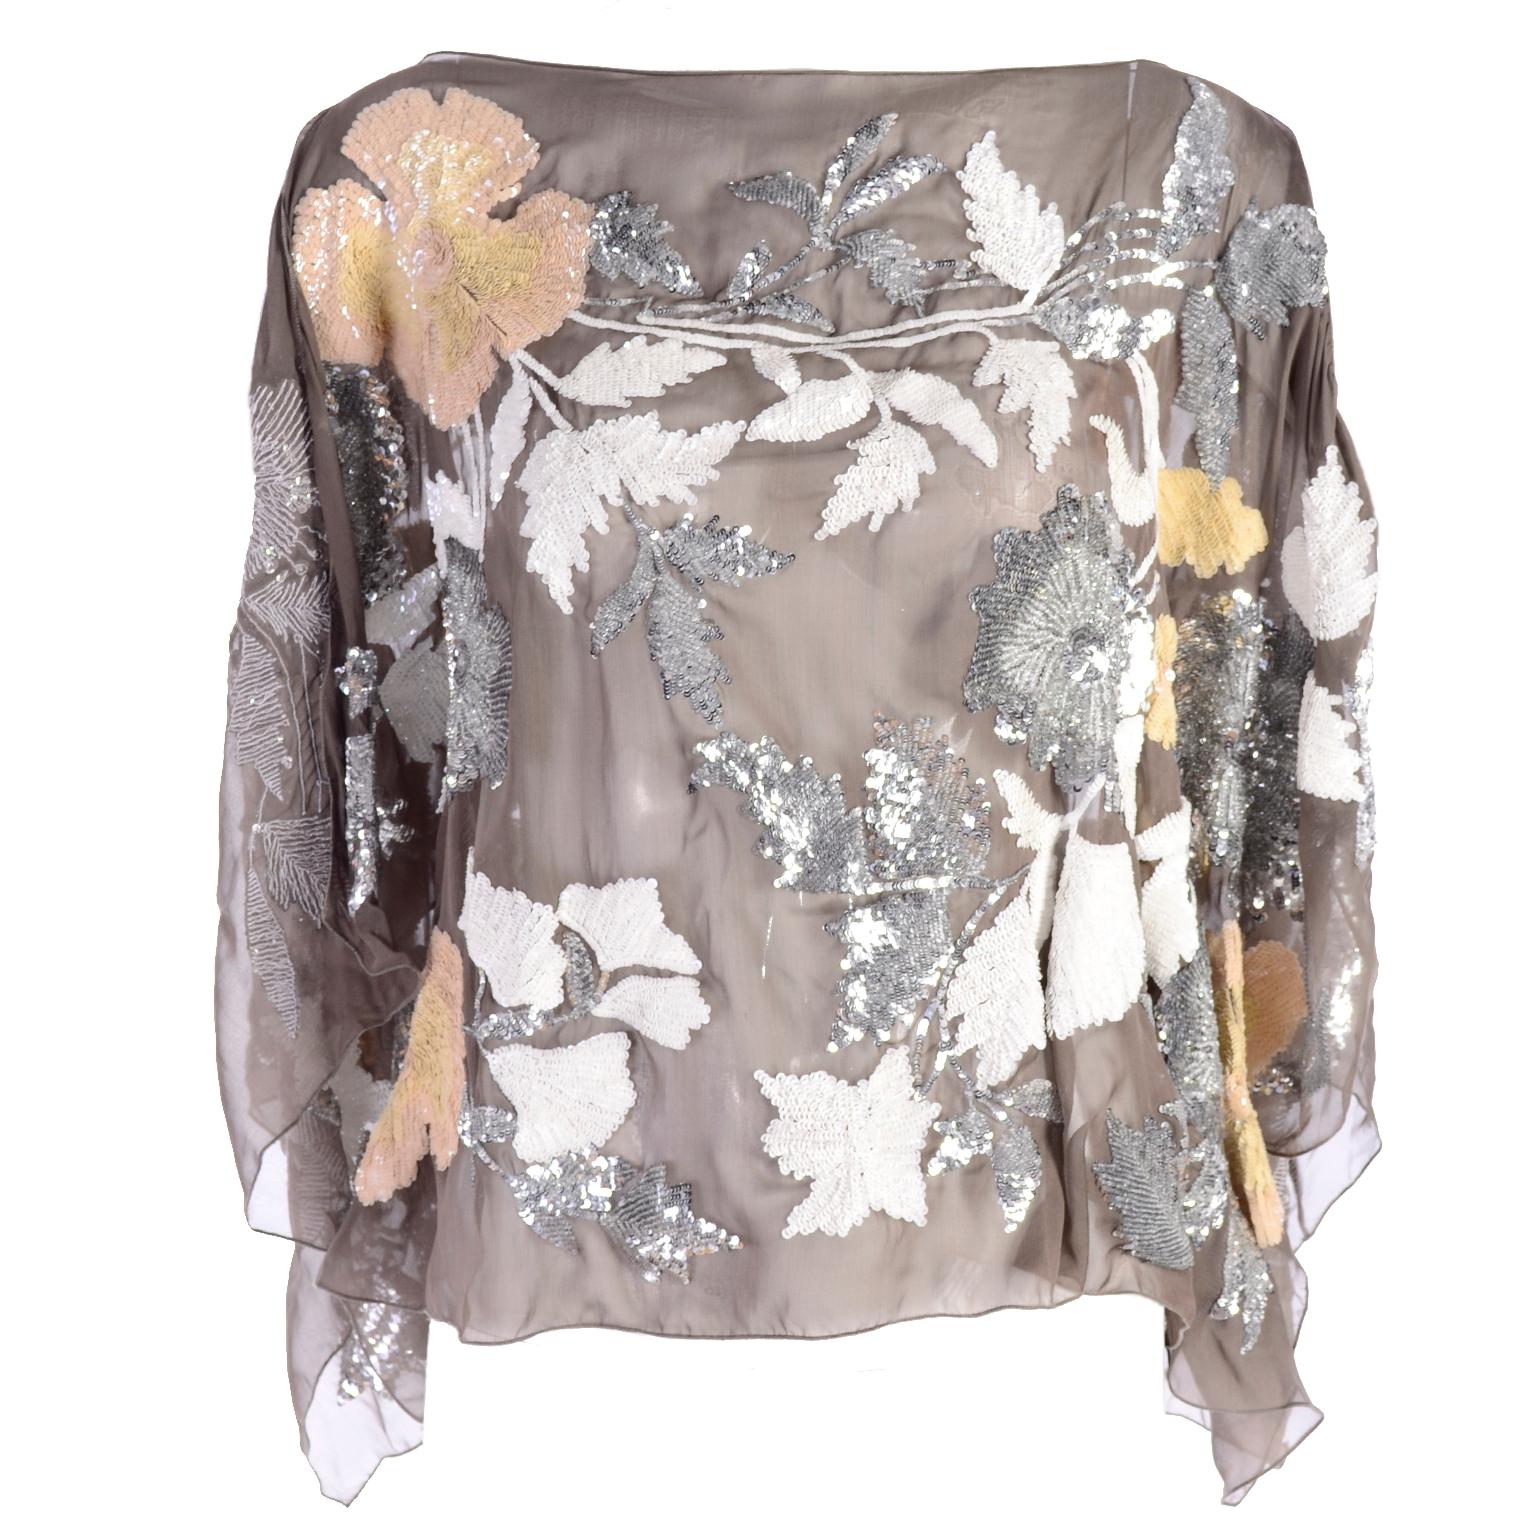 Valentino Top in Taupe Fine Silk With Metallic & Iridescent Sequins Size 6